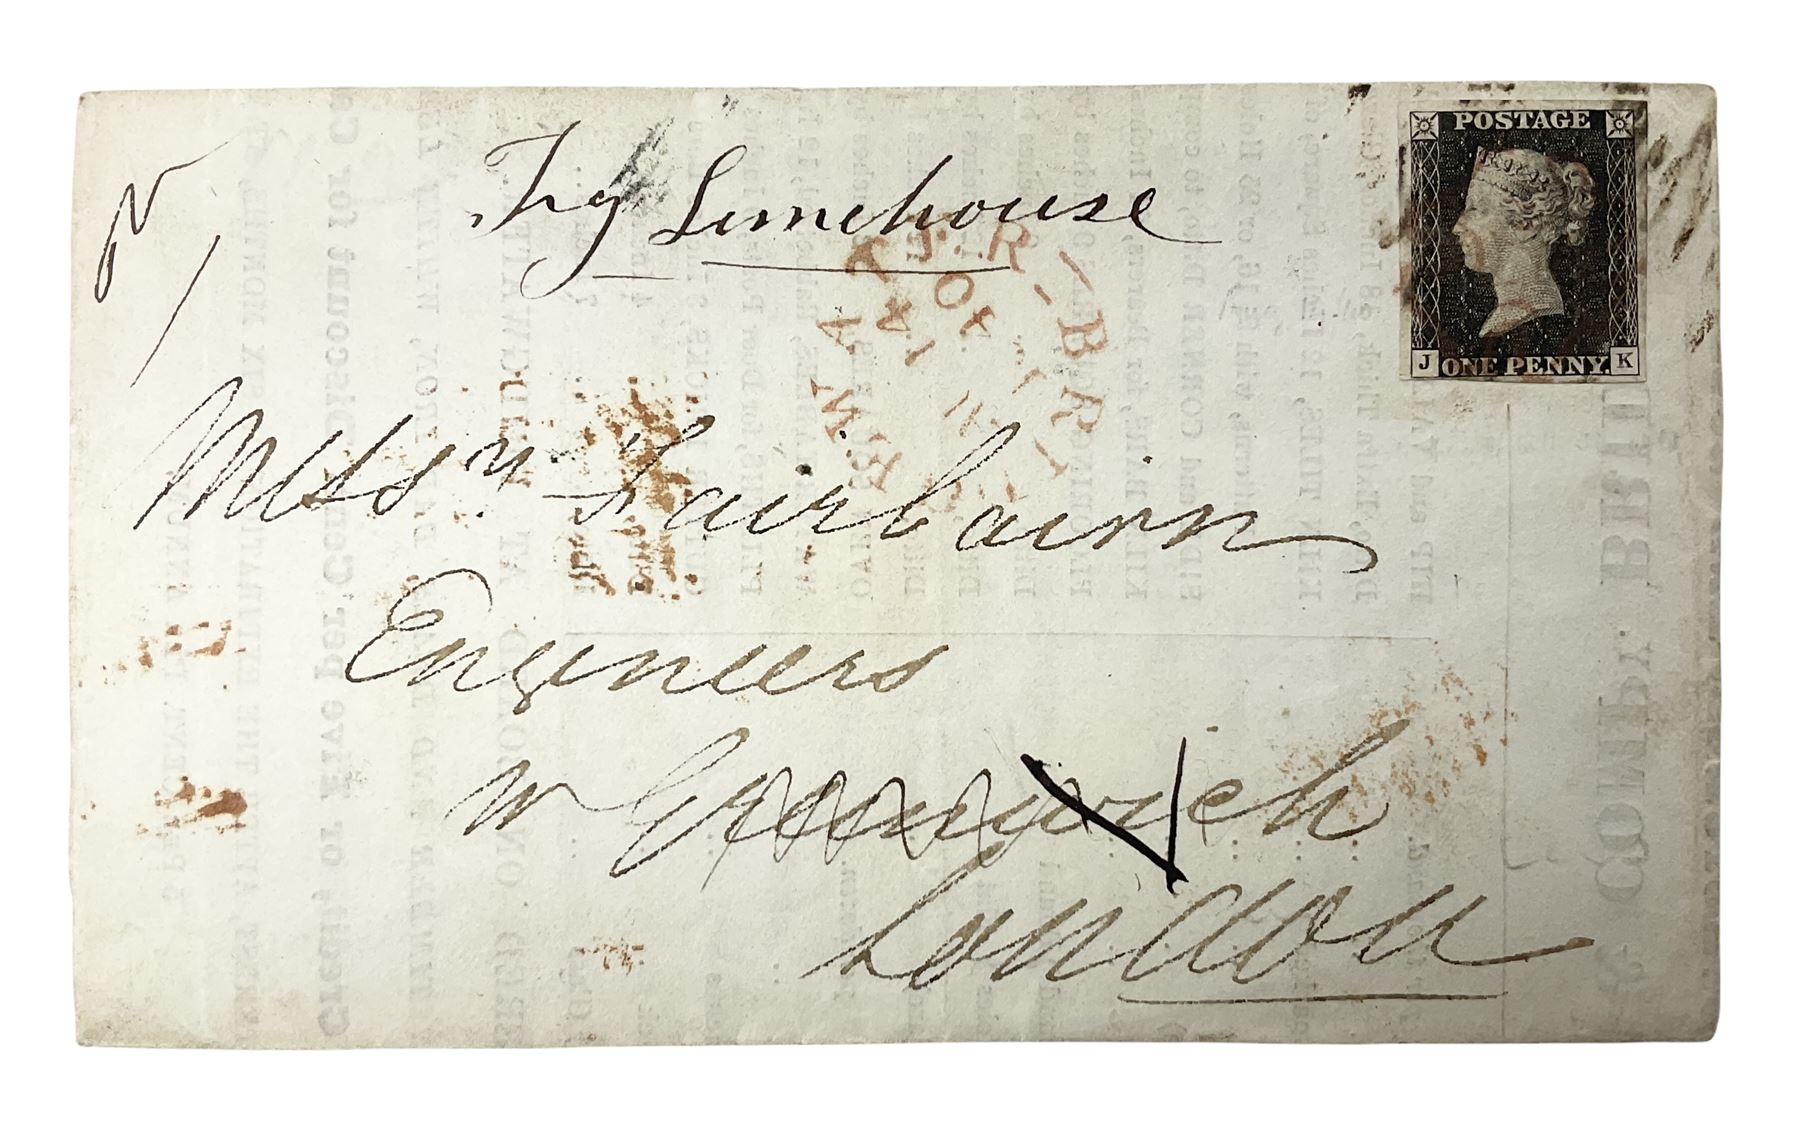 Queen Victoria penny black stamp on advertisement letter 'Browne & Compy Bridgwater'